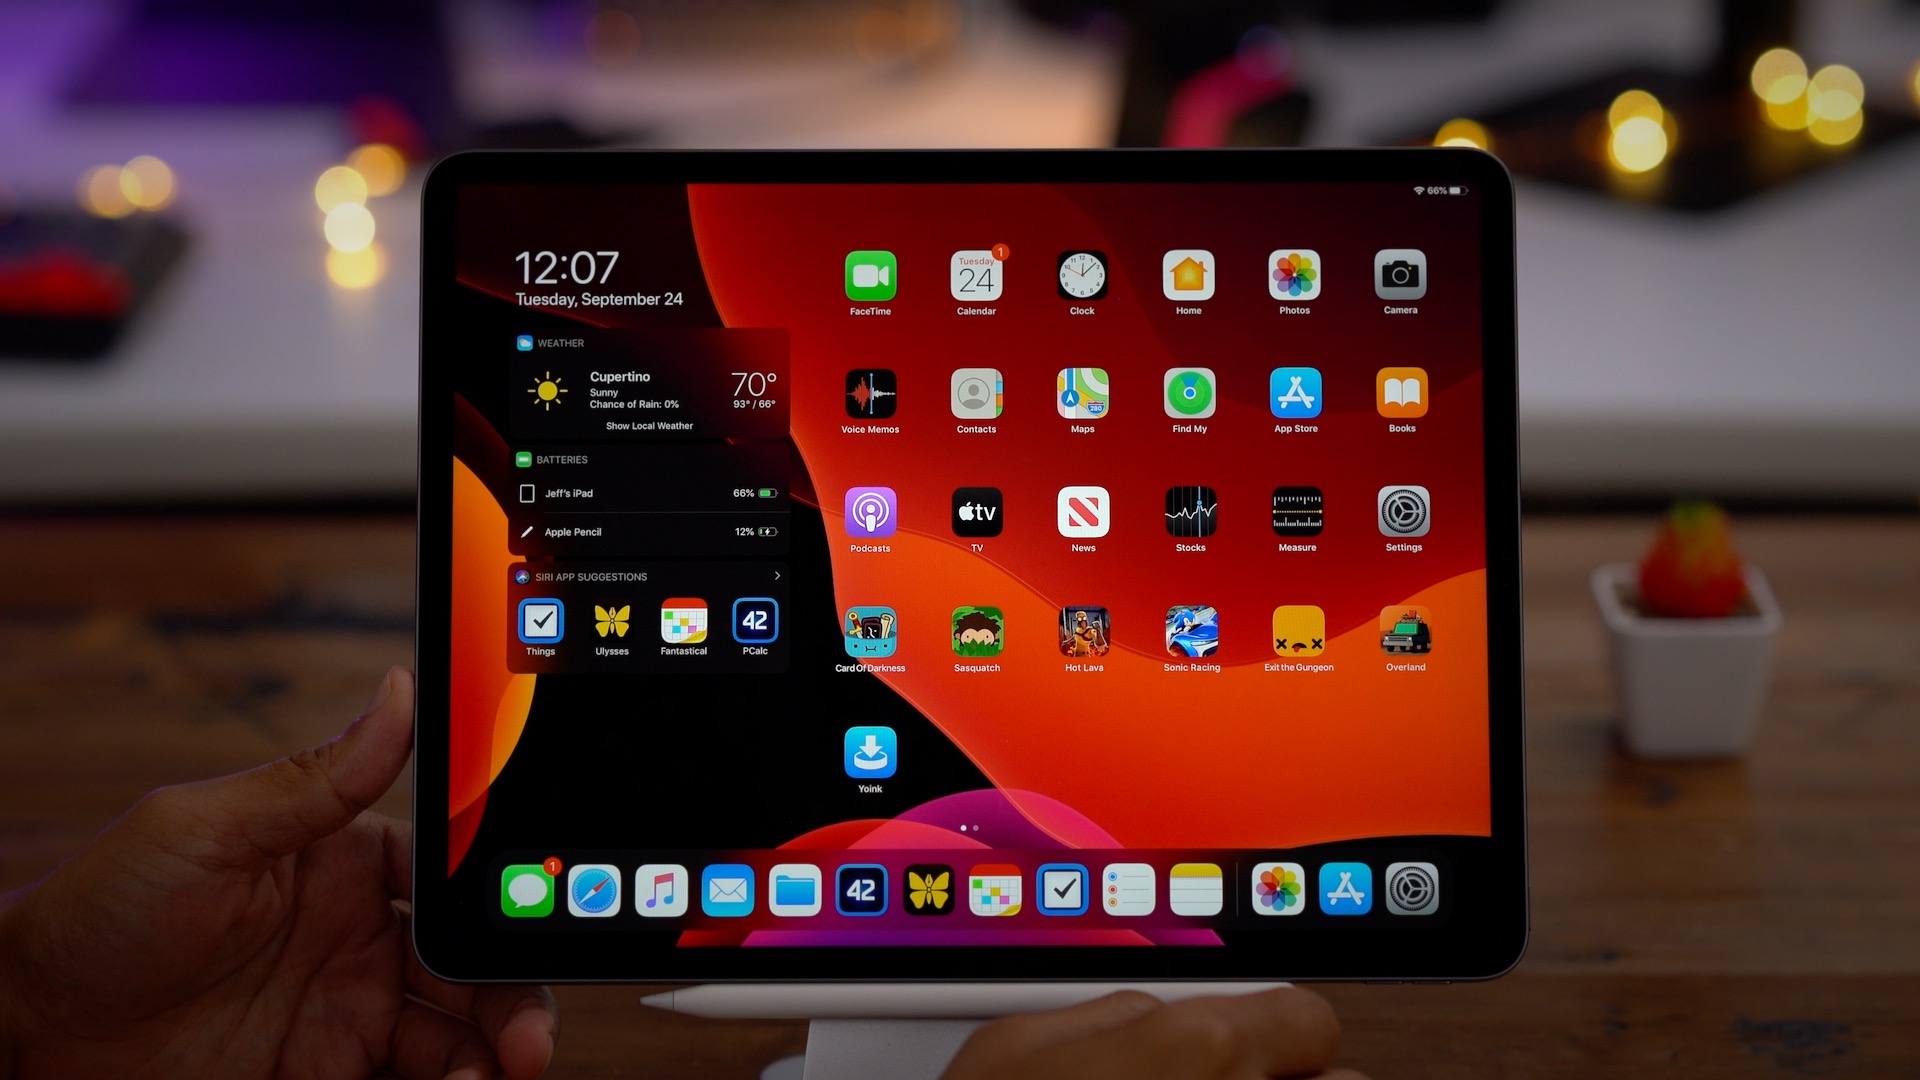 iPadOS 13.1: Hands-on with the top new features and changes [Video]